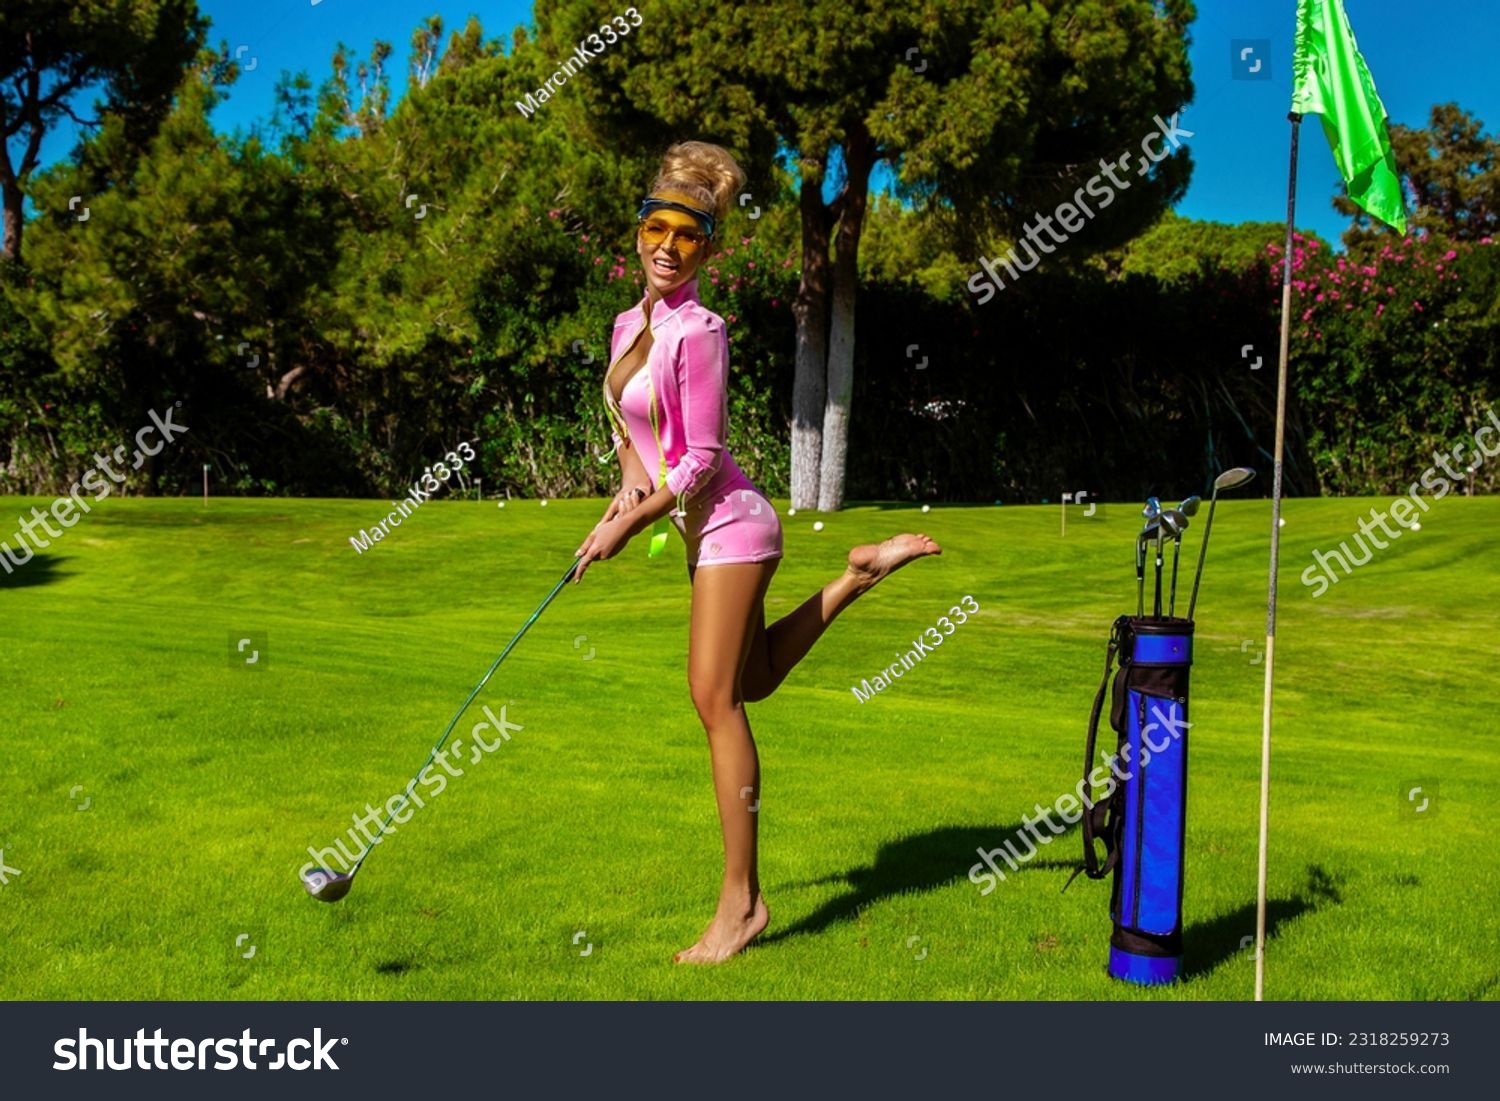 corey kirkendoll recommends Sexy Women Playing Golf